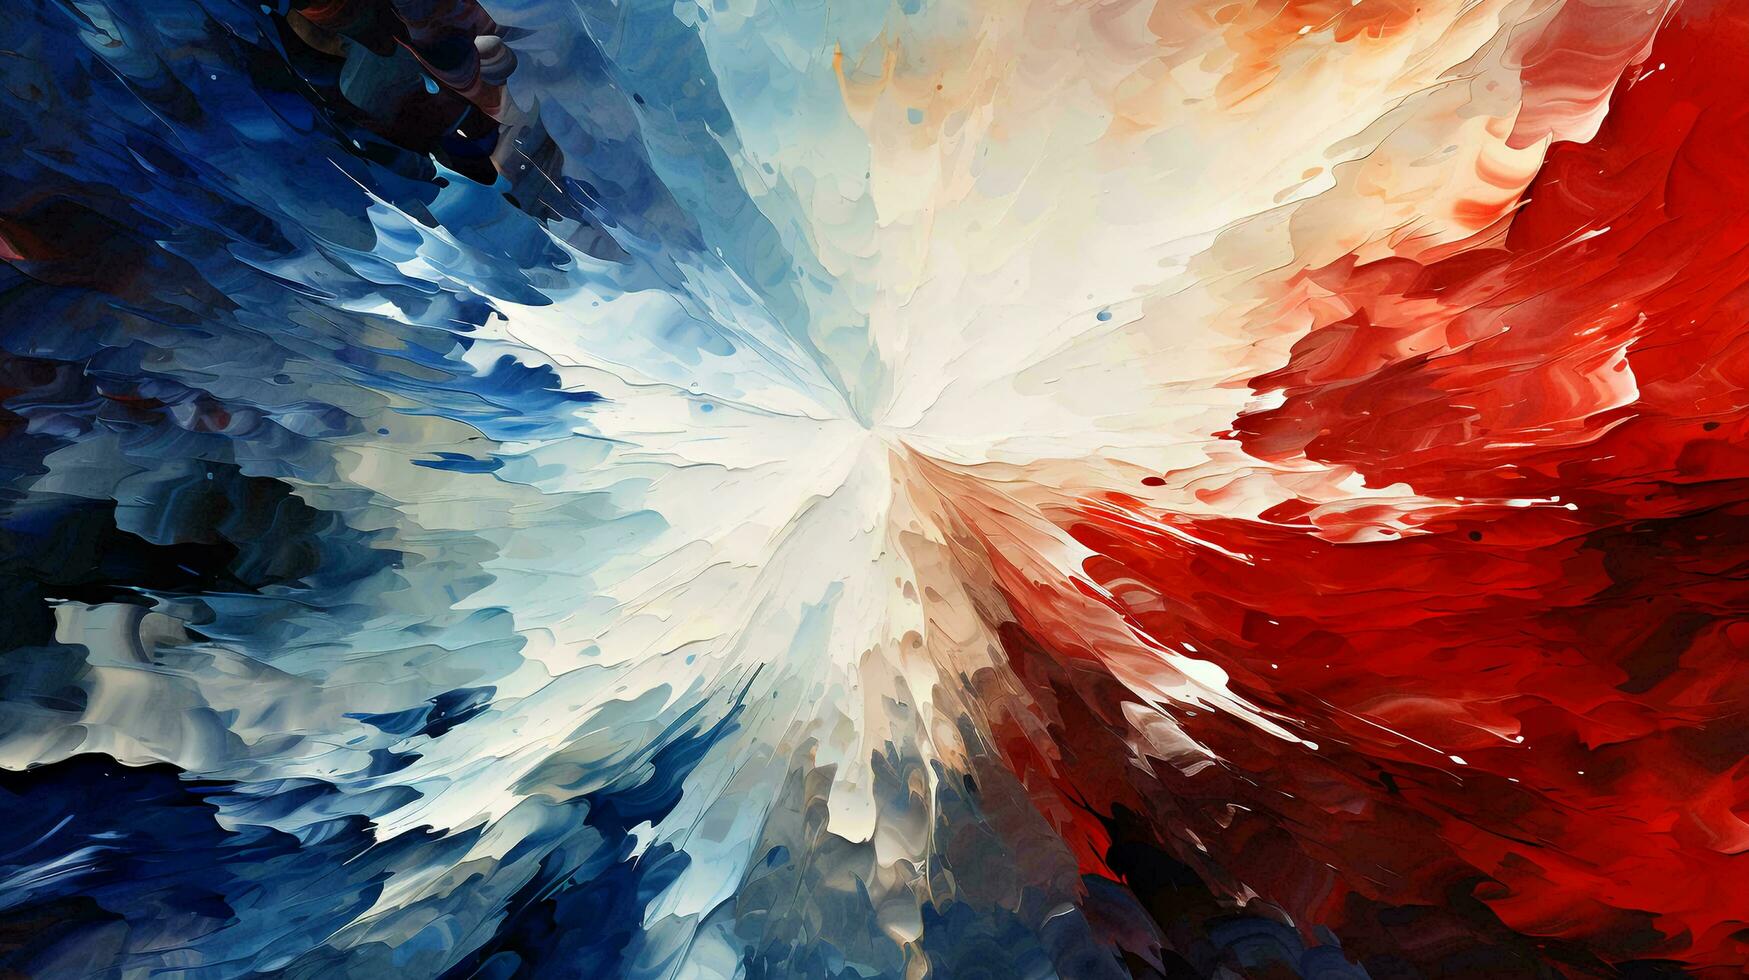 Abstract background of paint strokes in the form of waves and lines in blue red white colors of the American flag photo